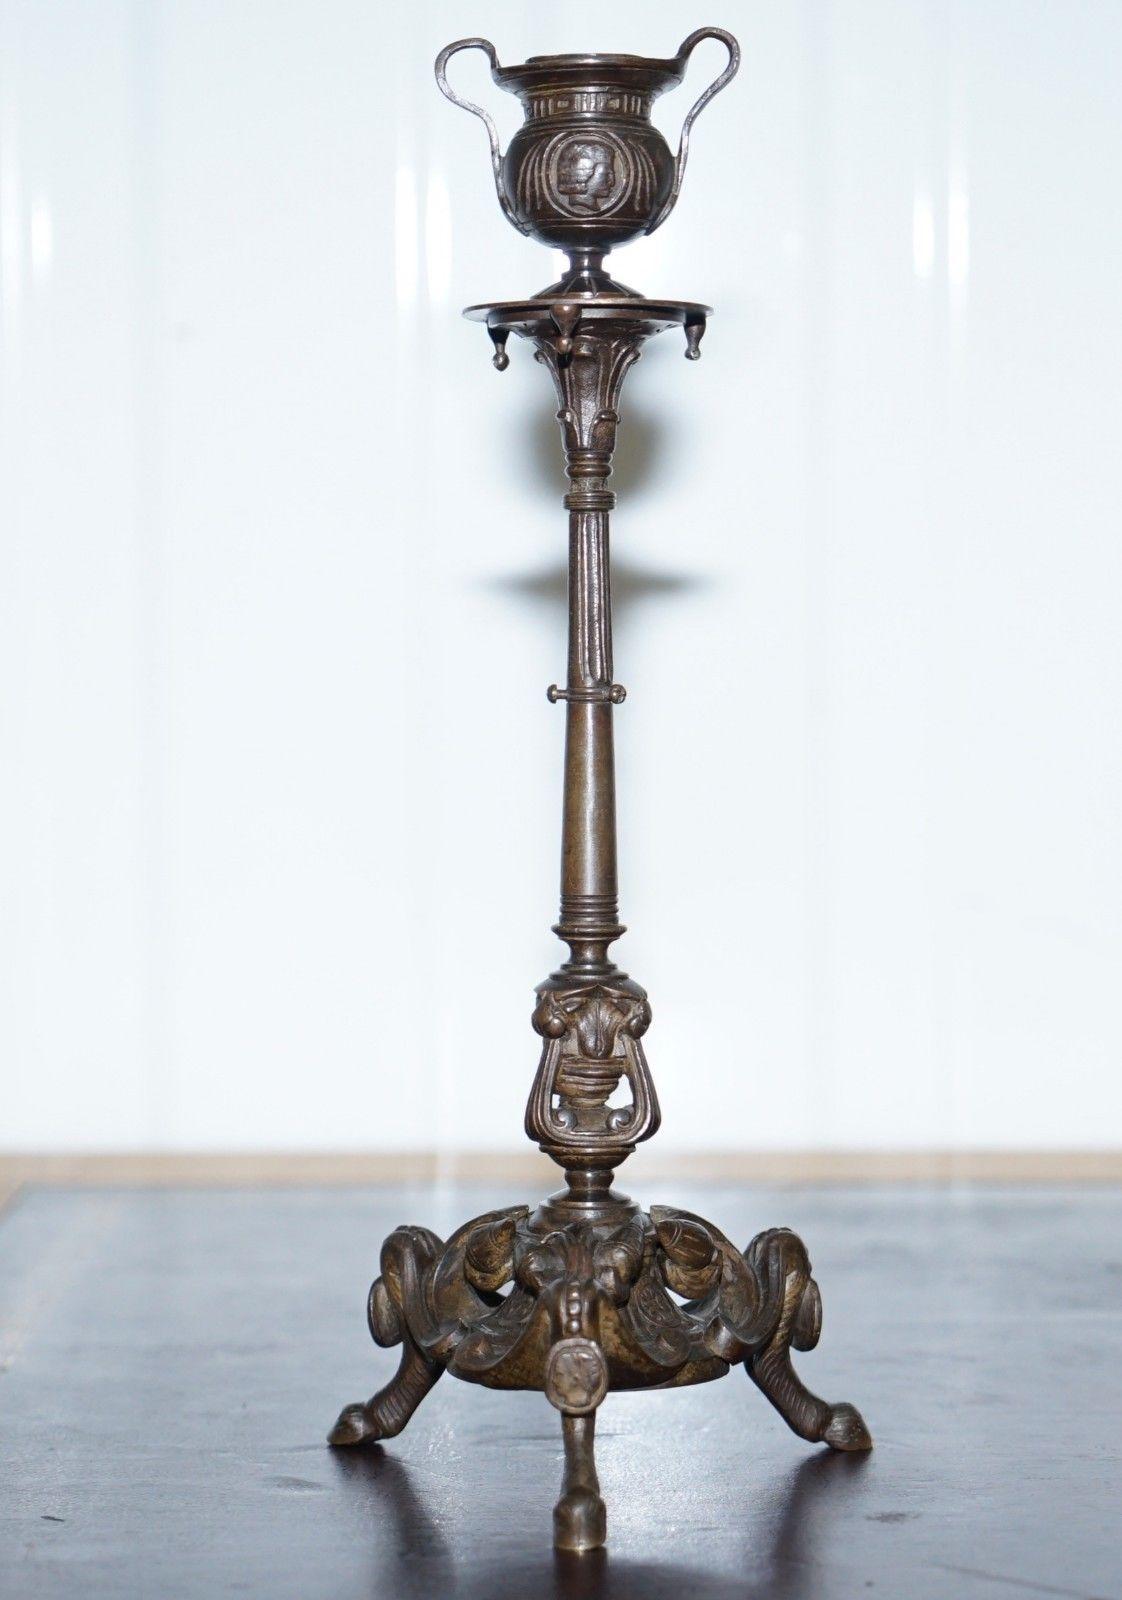 Wimbledon Furniture

We are delighted to offer for sale this simply stunning pair of solid bronze candlesticks after Auguste-Maximilien Delafontaine 

The pair of candelabrum stand on triform legs with paw feet, and floral and foliage decoration at